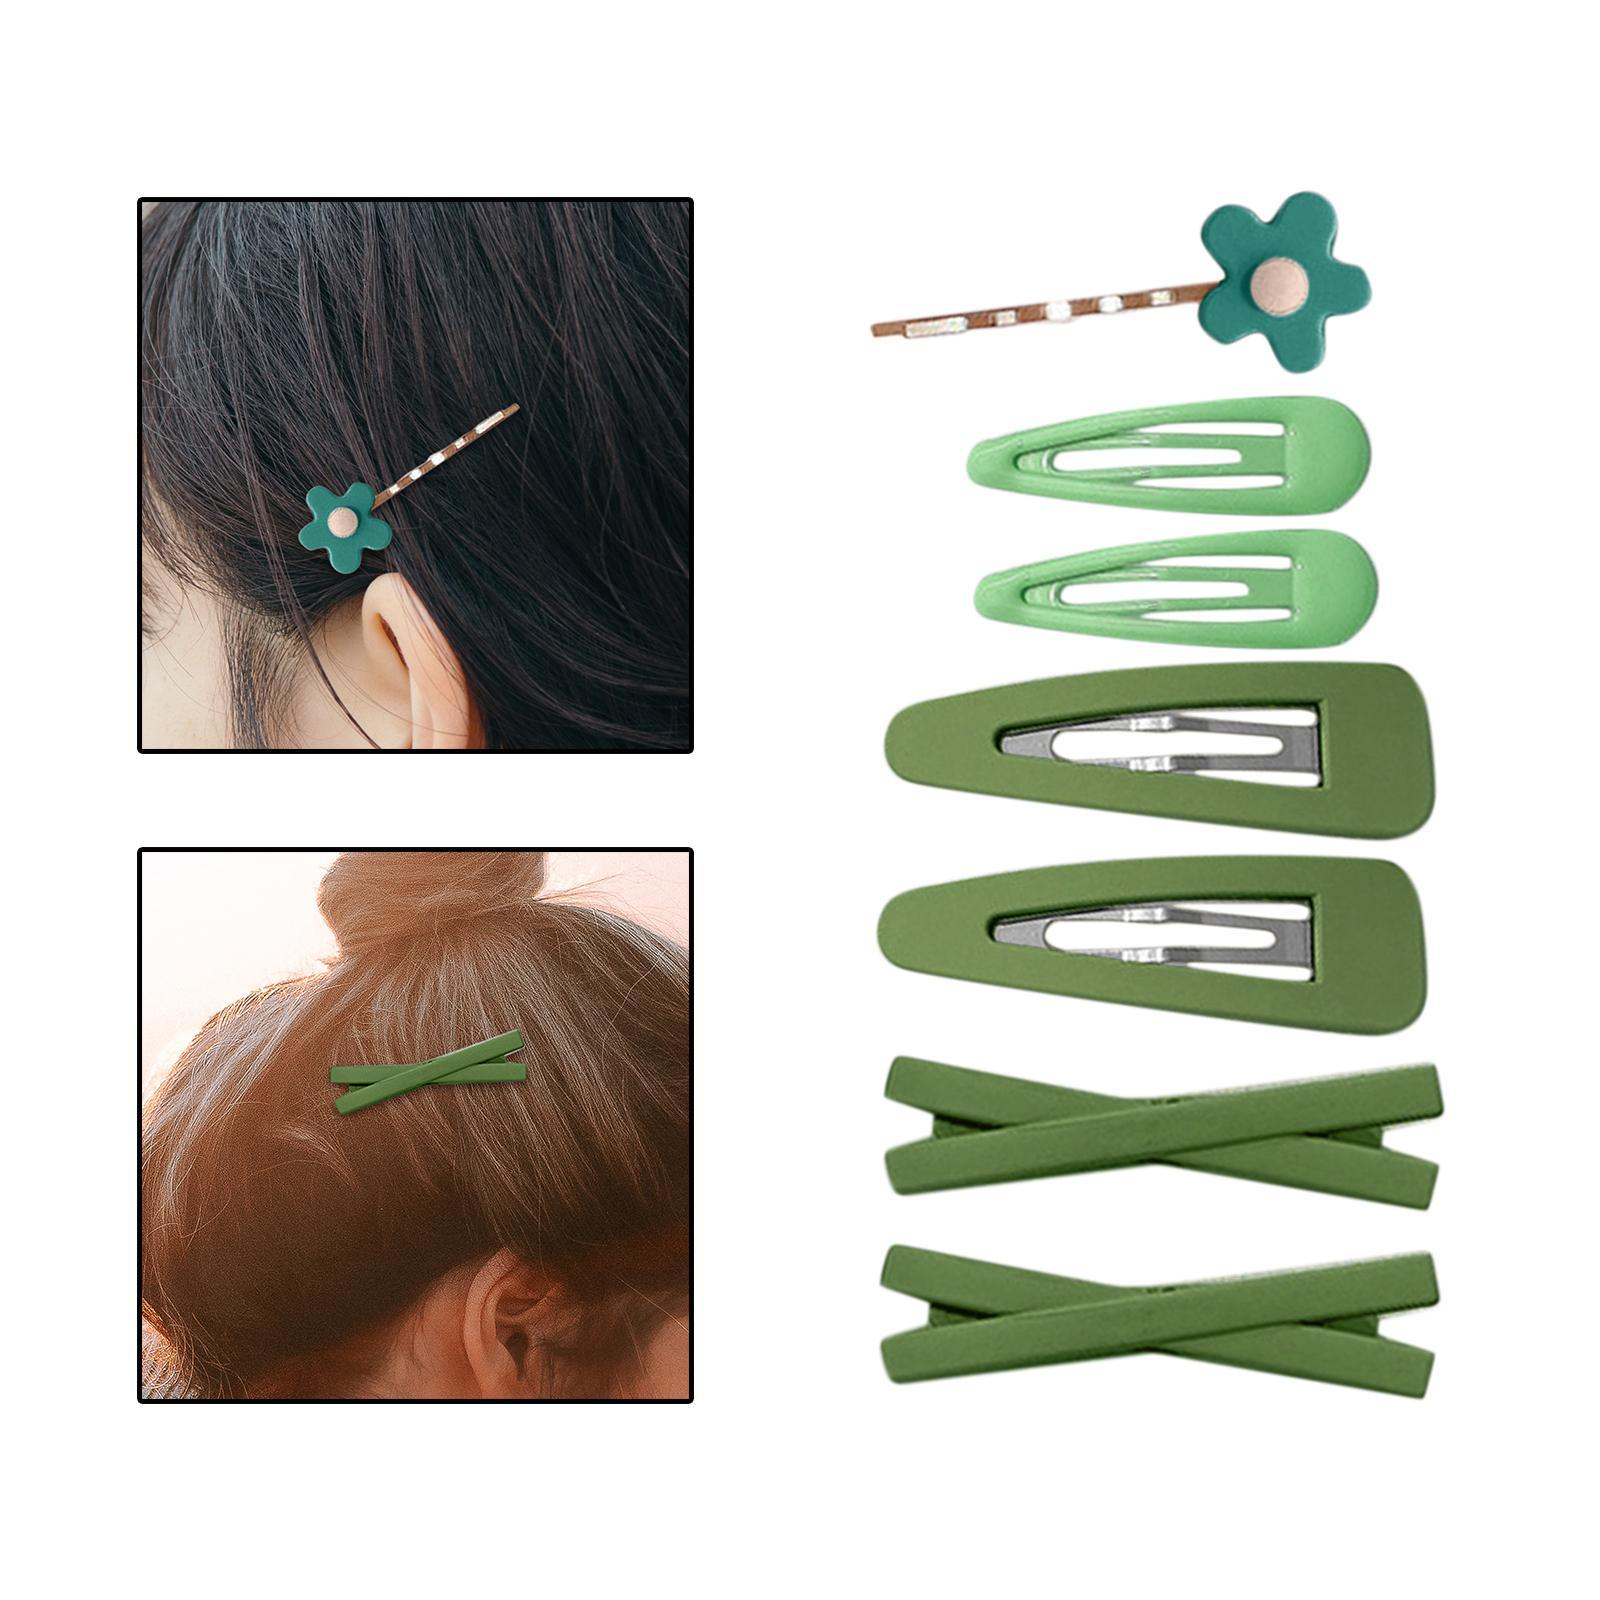 7Pcs Girls Hair Clips Resin Headwear Hairclips Gift Fashion Barrettes Snap Hairpins for Hairstyle Women Makeup Application Party Bangs Waves